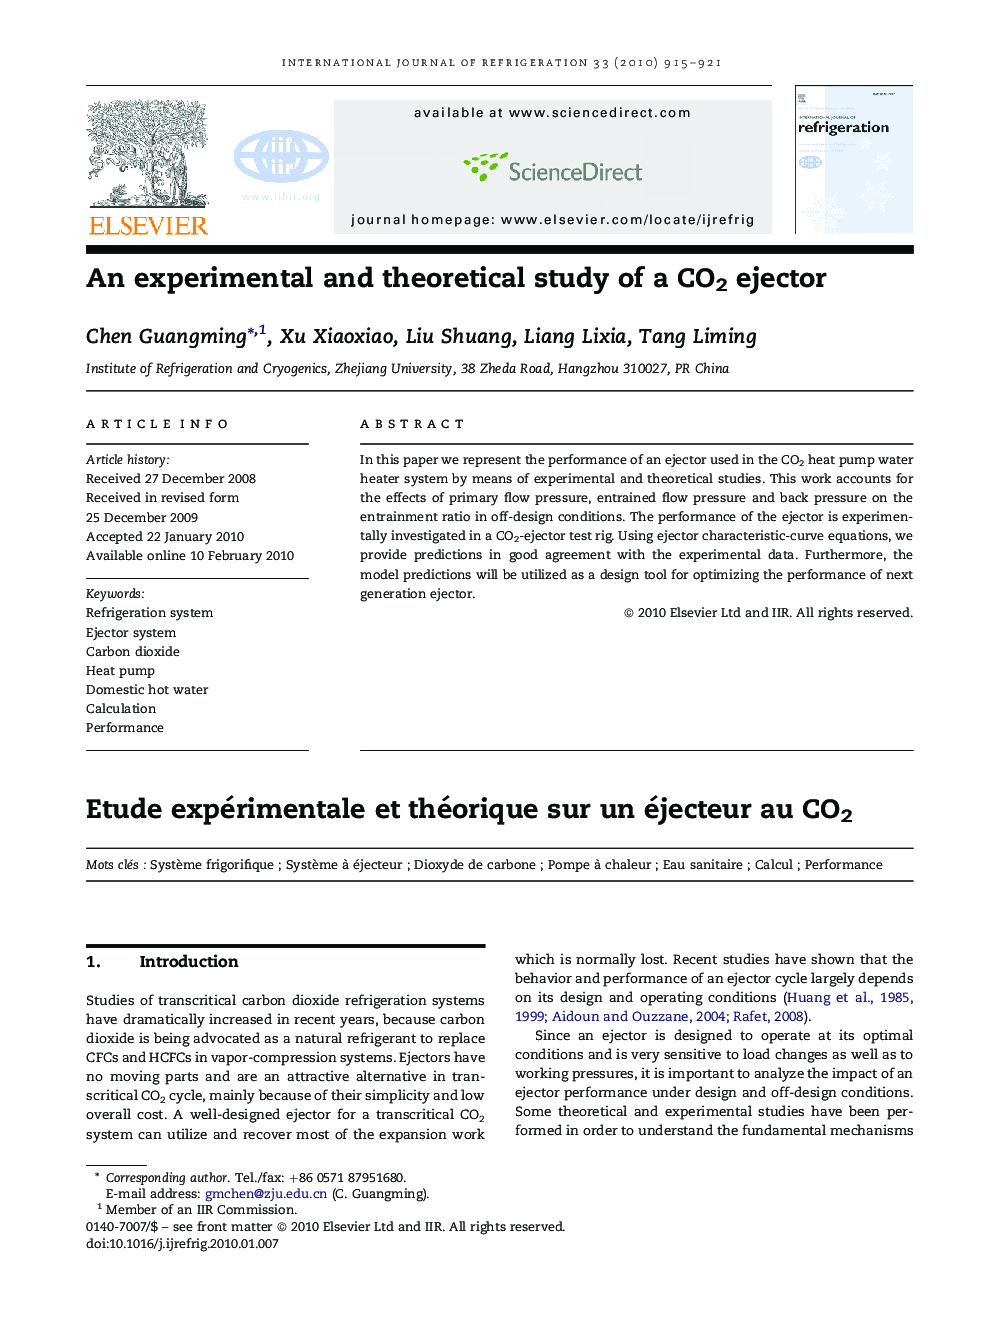 An experimental and theoretical study of a CO2 ejector